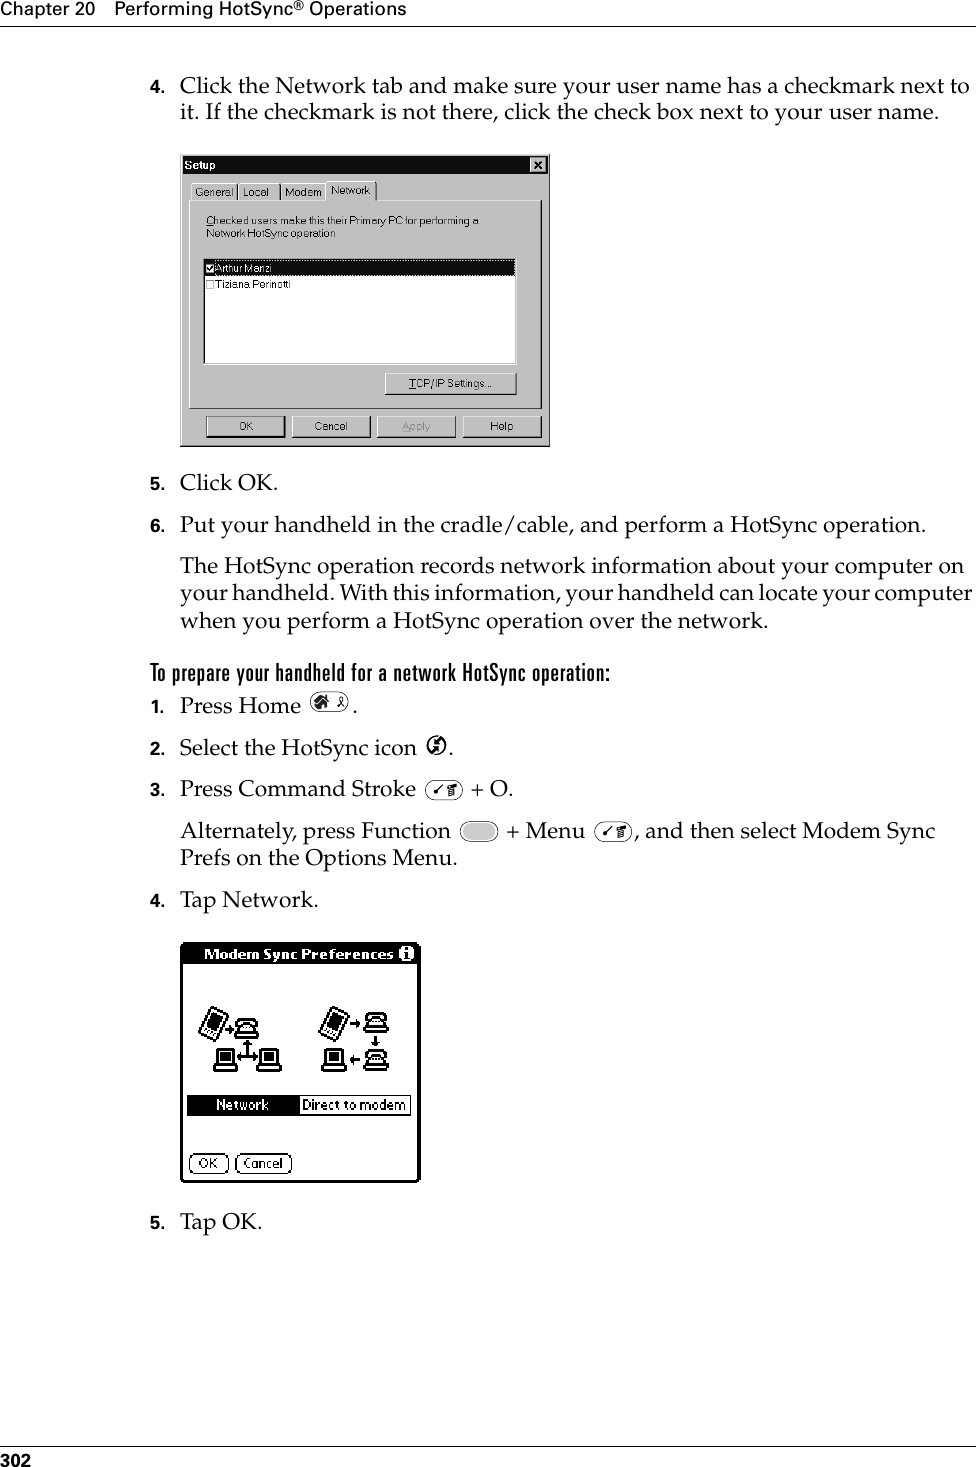 Chapter 20 Performing HotSync® Operations3024. Click the Network tab and make sure your user name has a checkmark next to it. If the checkmark is not there, click the check box next to your user name.5. Click OK.6. Put your handheld in the cradle/cable, and perform a HotSync operation.The HotSync operation records network information about your computer on your handheld. With this information, your handheld can locate your computer when you perform a HotSync operation over the network.To prepare your handheld for a network HotSync operation:1. Press Home  . 2. Select the HotSync icon  . 3. Press Command Stroke   + O.Alternately, press Function   + Menu  , and then select Modem Sync Prefs on the Options Menu.4. Tap Network.5. Tap  OK .Palm, Inc. Confidential